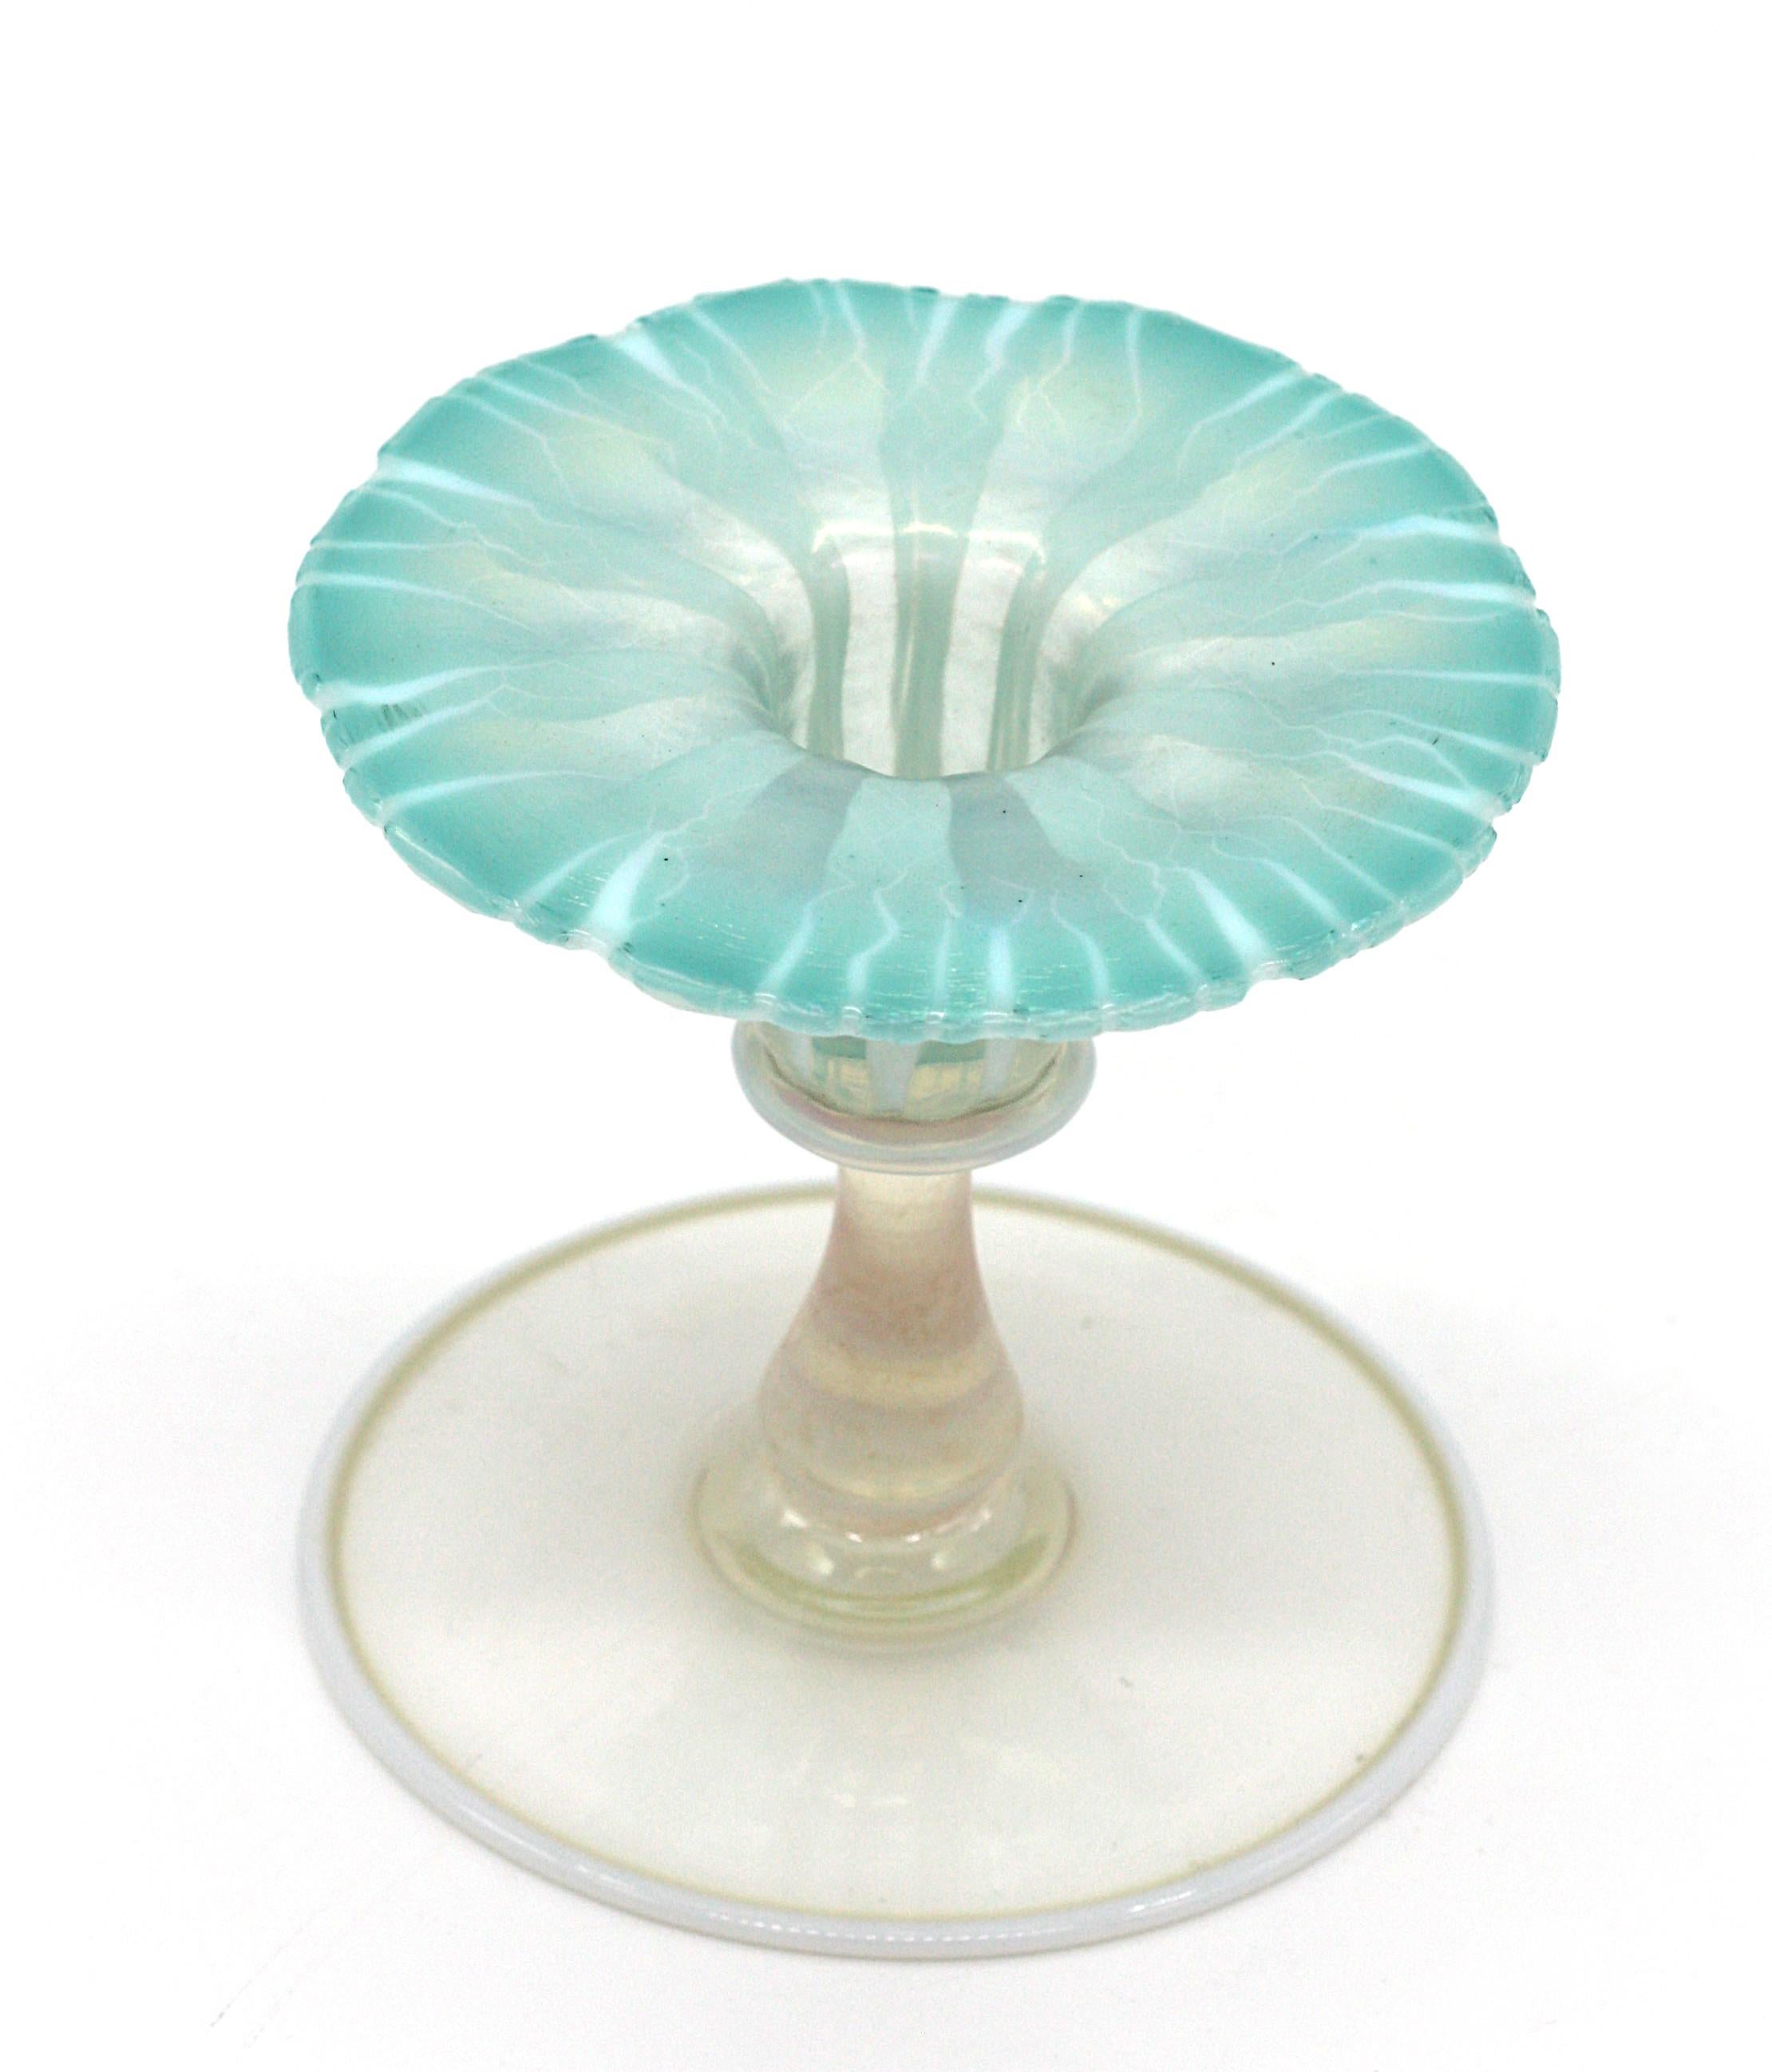 A Tiffany Favrile glass morning glory candlestick.
Circa 1918-28.
In aqua blue, opalescent and colorless glass, signed L.C.T.-Favrile
Measure: height 3.75 in. (9.52 cm.)
Condition report.
Overall good condition and appearance.